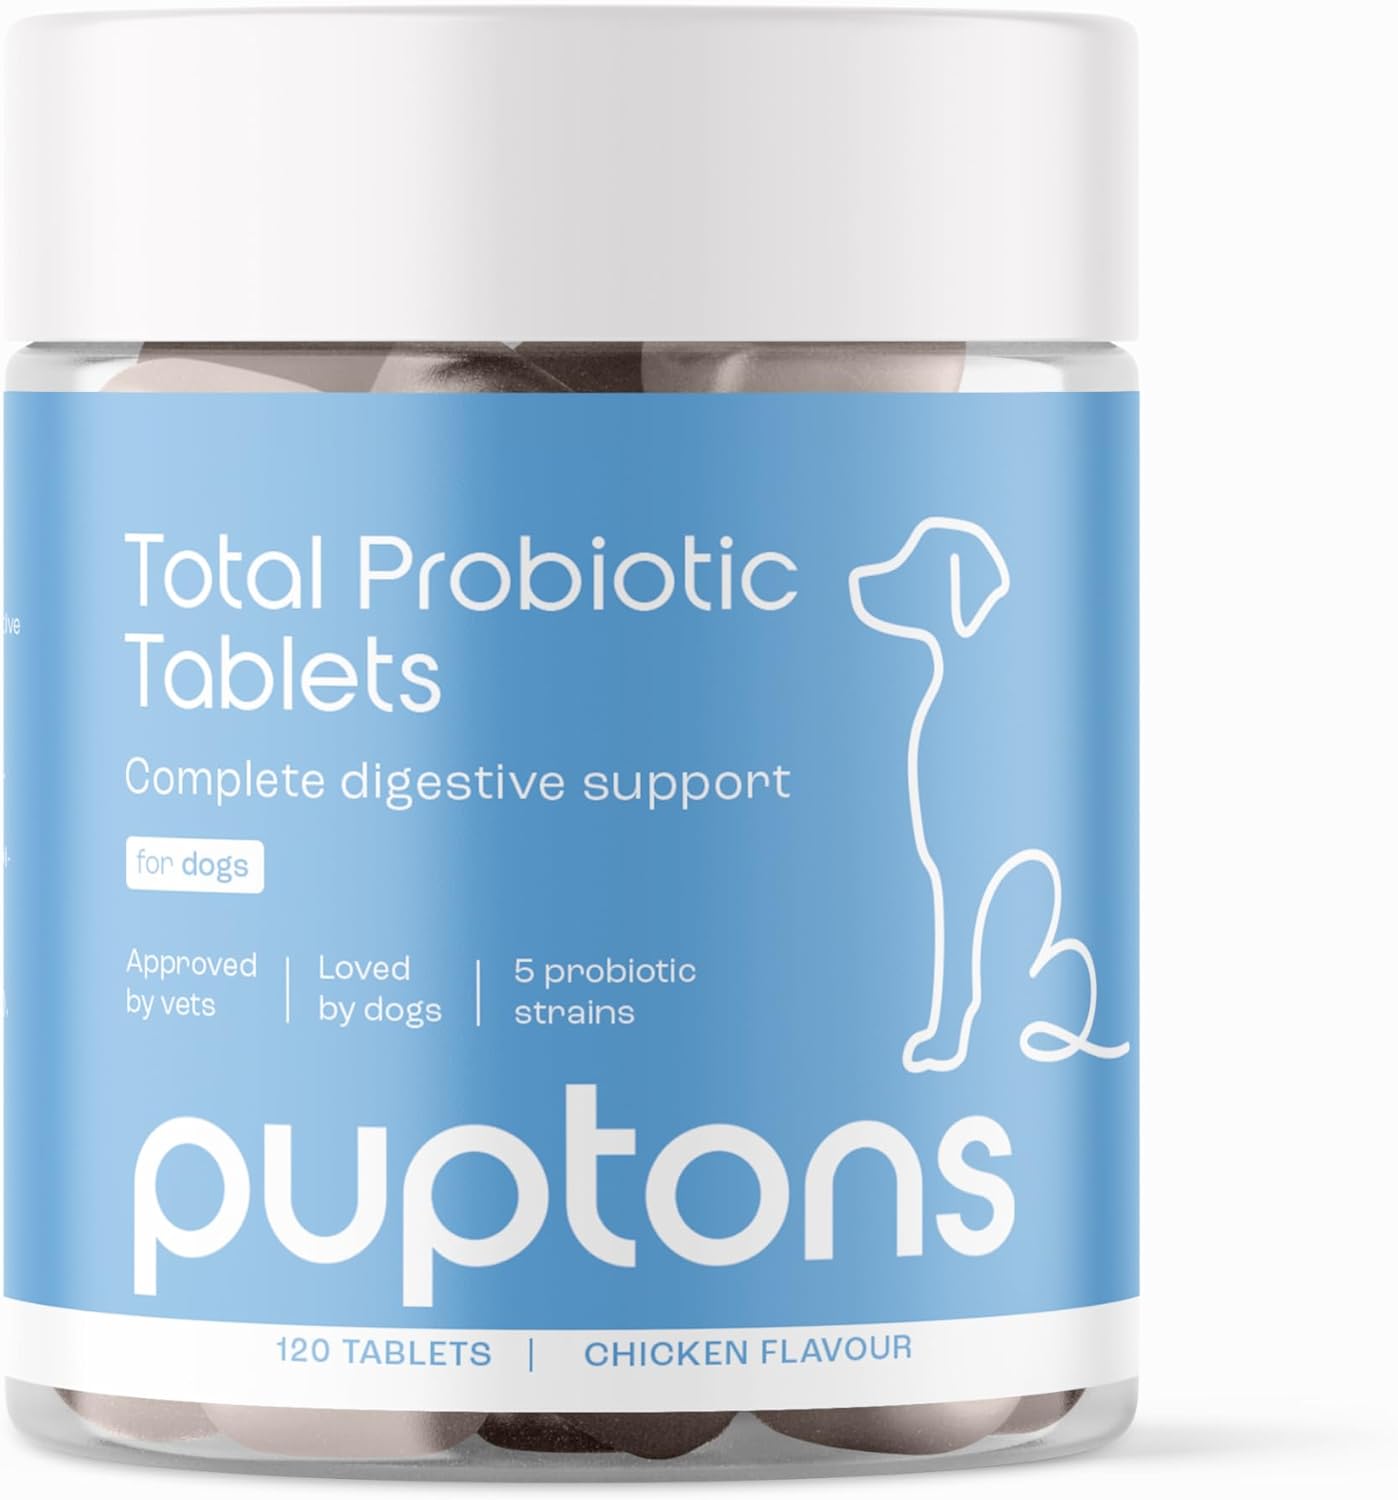 Total Probiotic Tablets for Dogs | Dog Probiotic Supplements for Complete Digestive Support | Yeast Infection Treatment | Wind, IBS & Diarrhoea Relief | Reduce Itching | Chicken Flavour (30 Tablets)